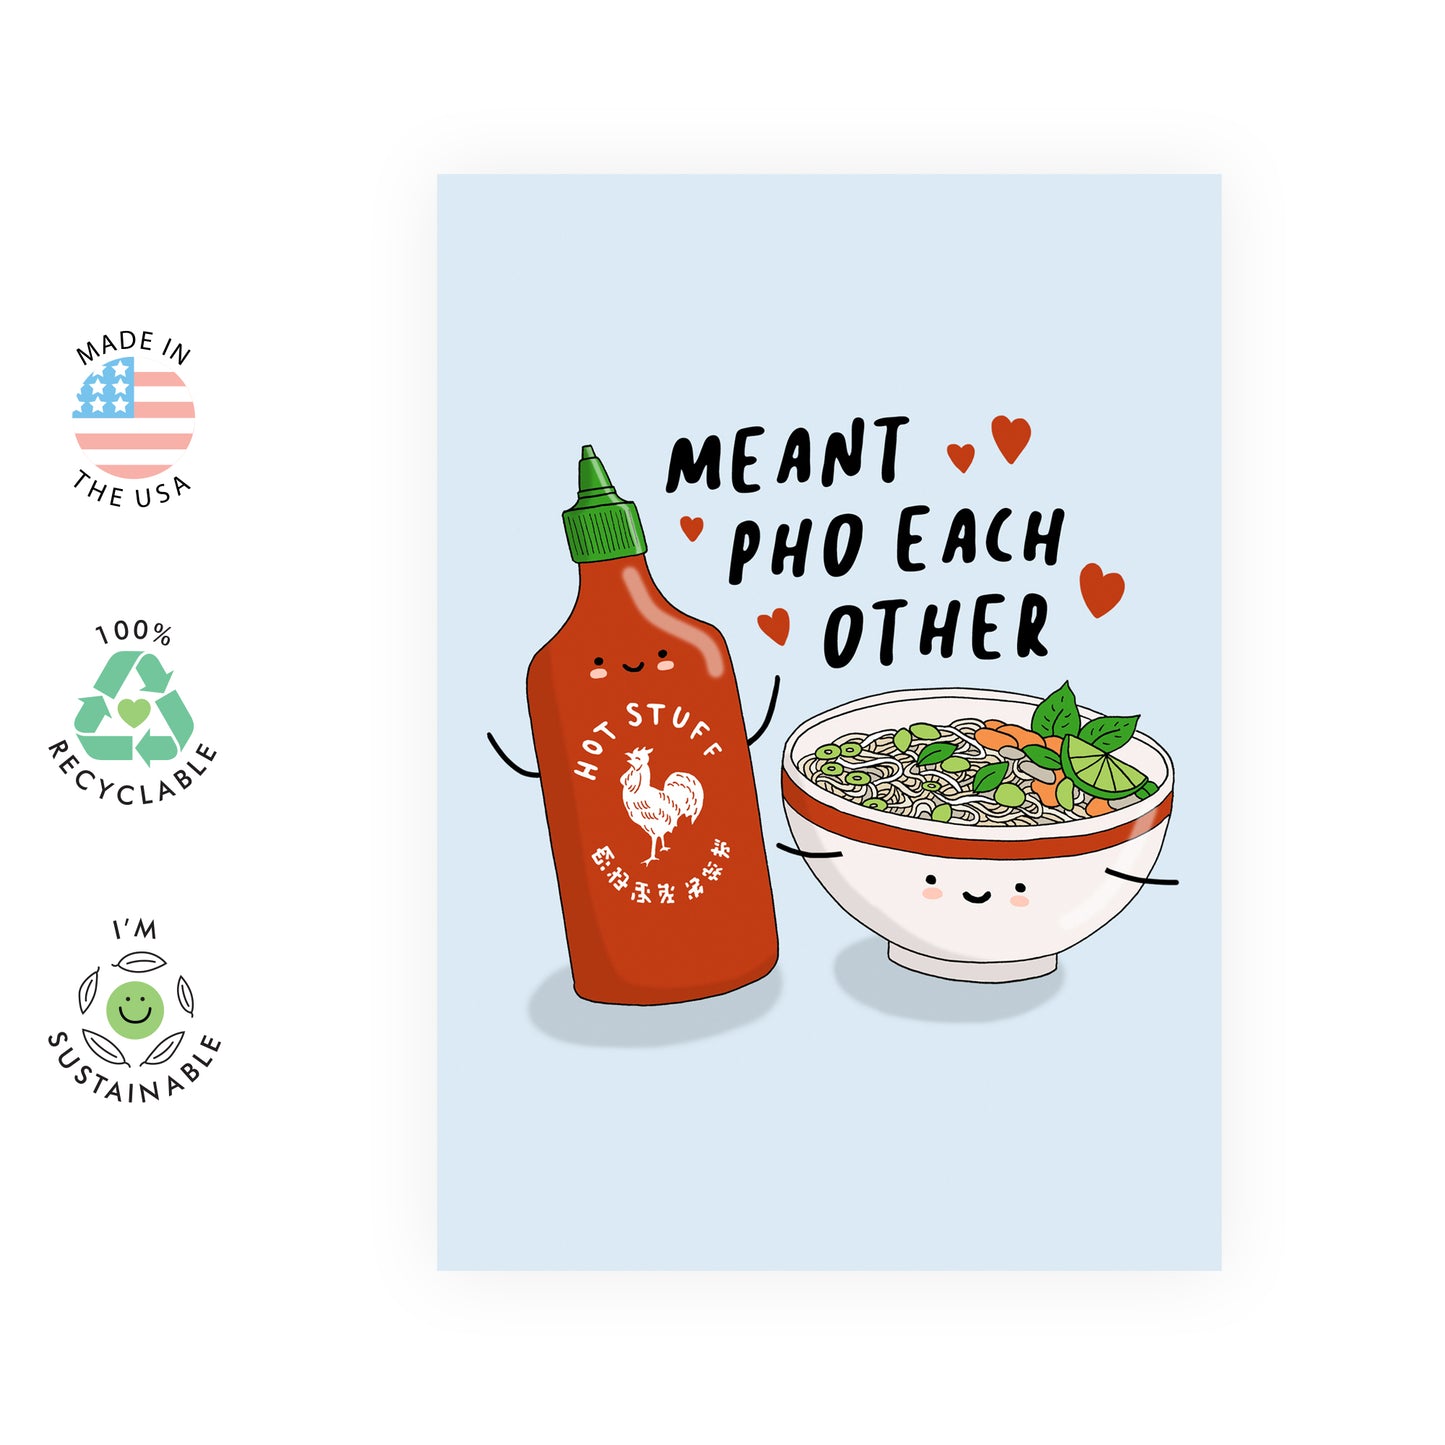 Cute Anniversary Card - Meant Pho Each Other - For Men Women Him Her